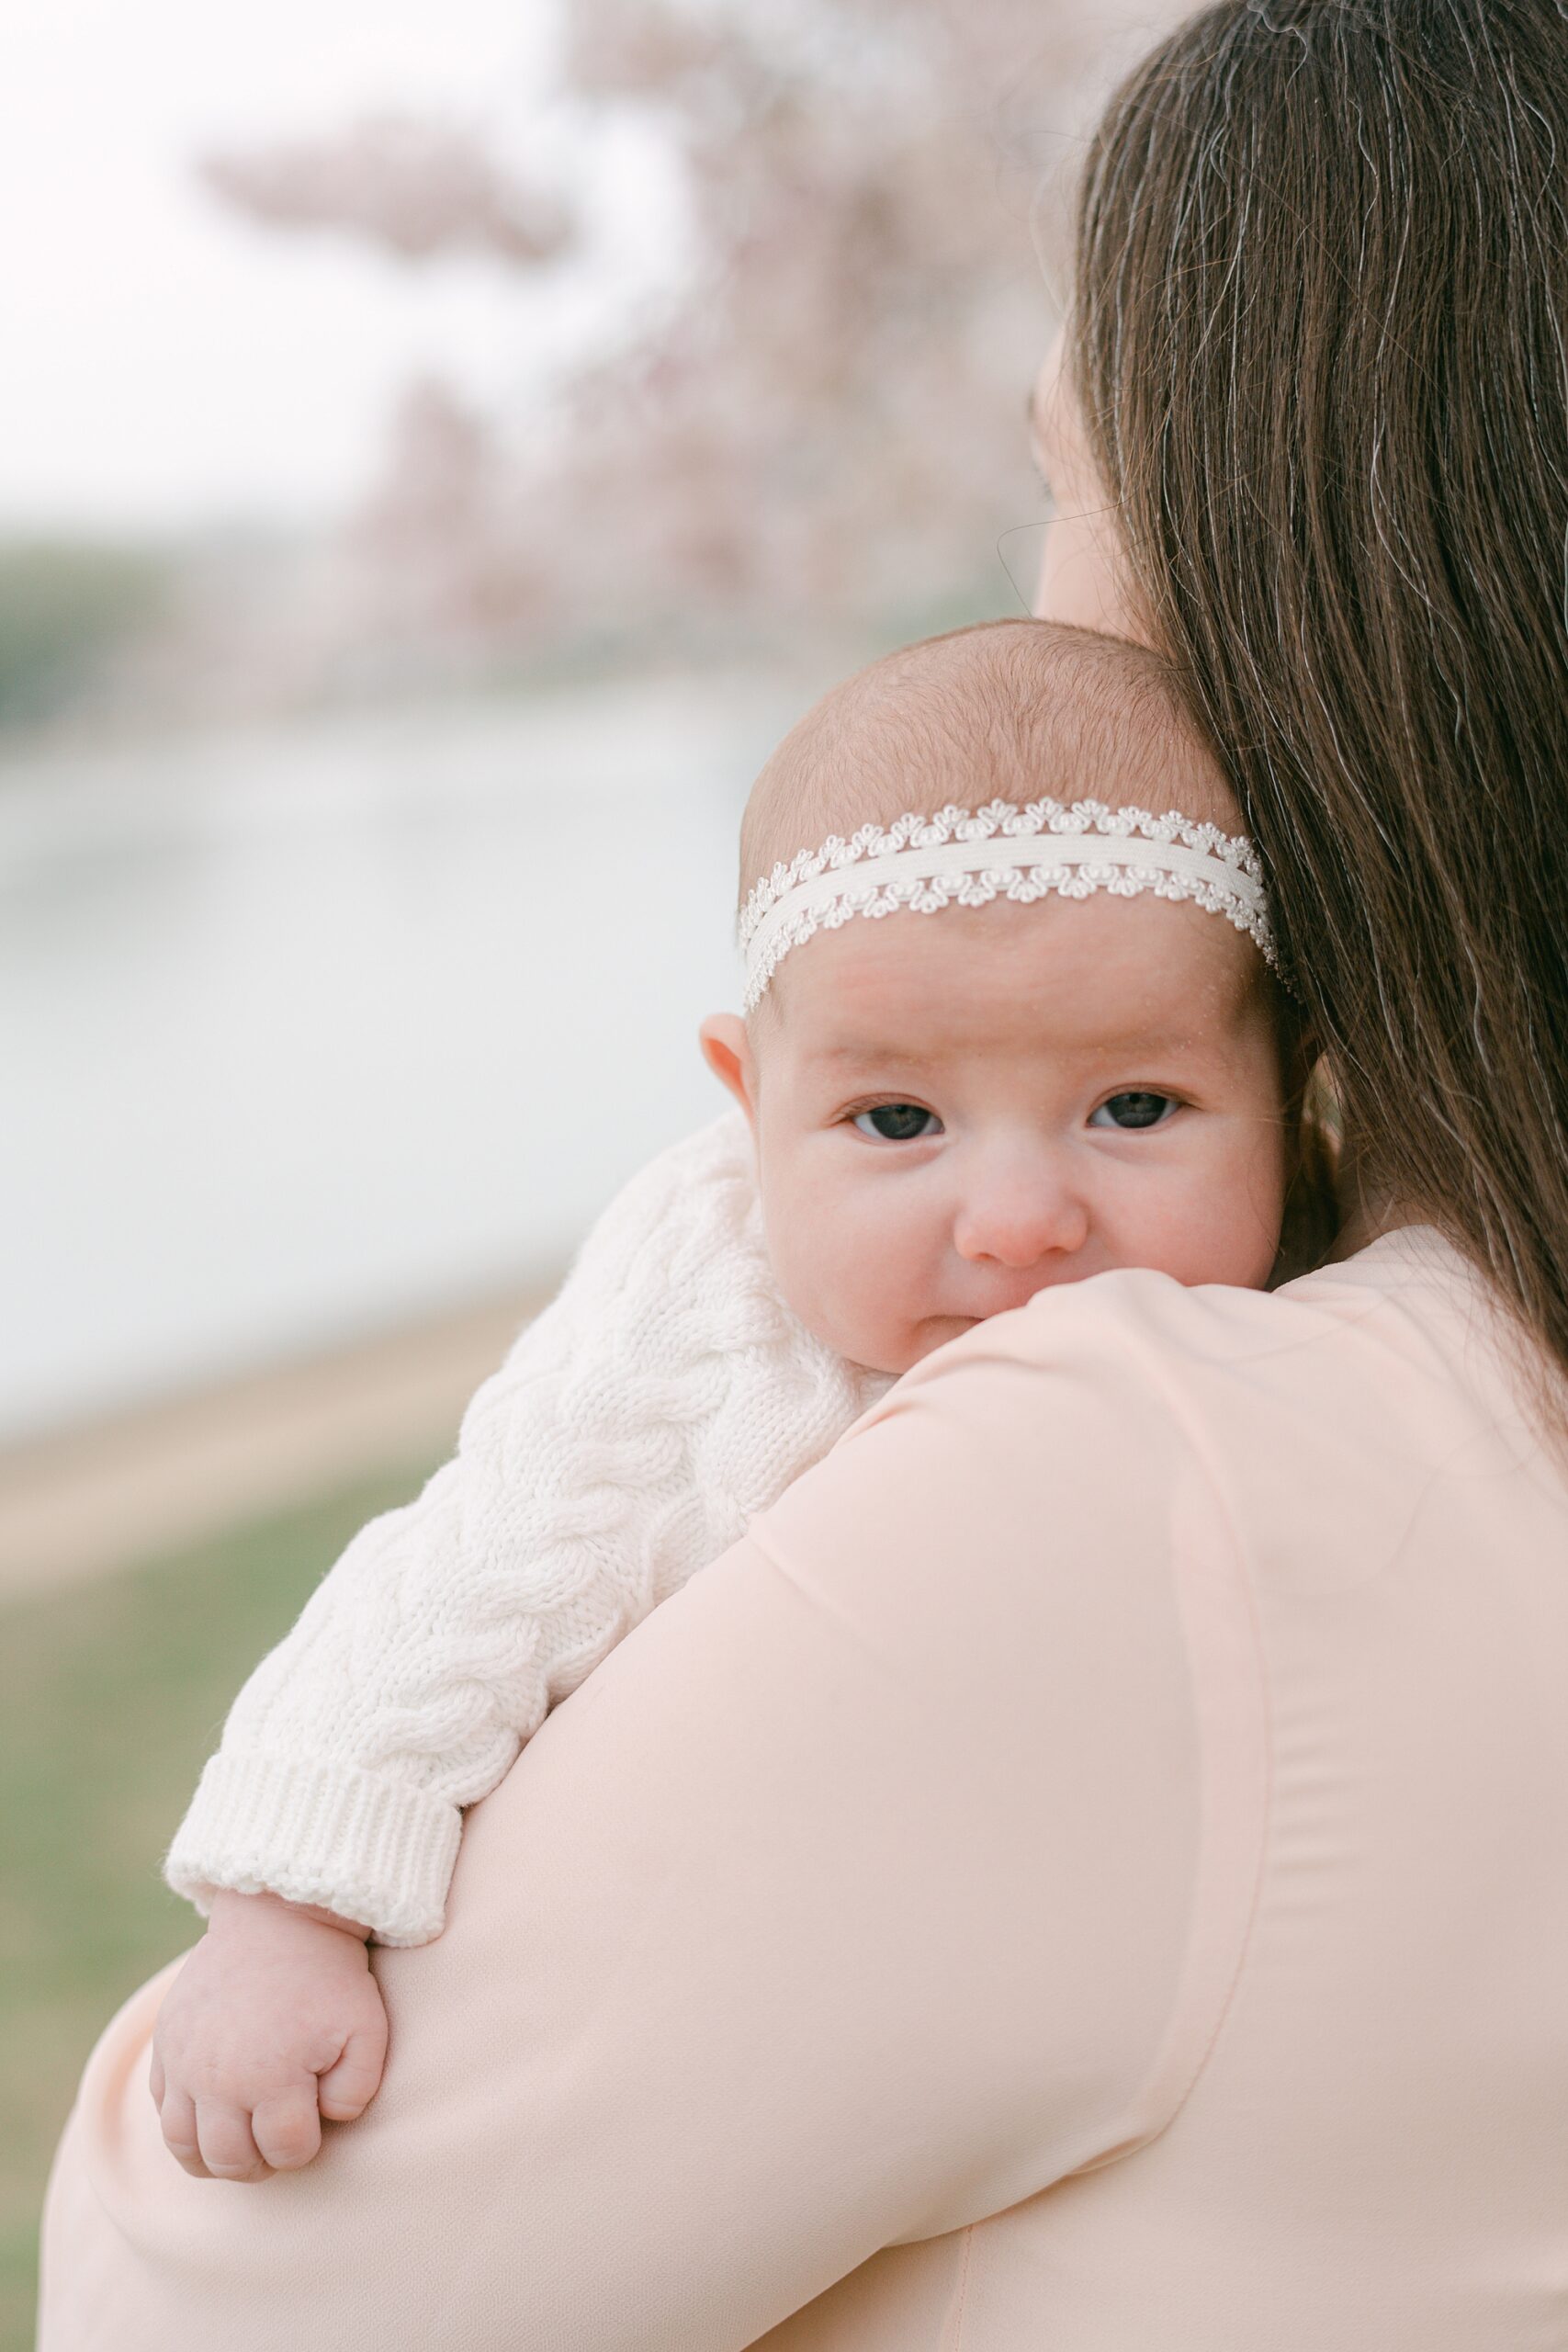 baby girl lays on mom's shoulder with white headband and sweater 